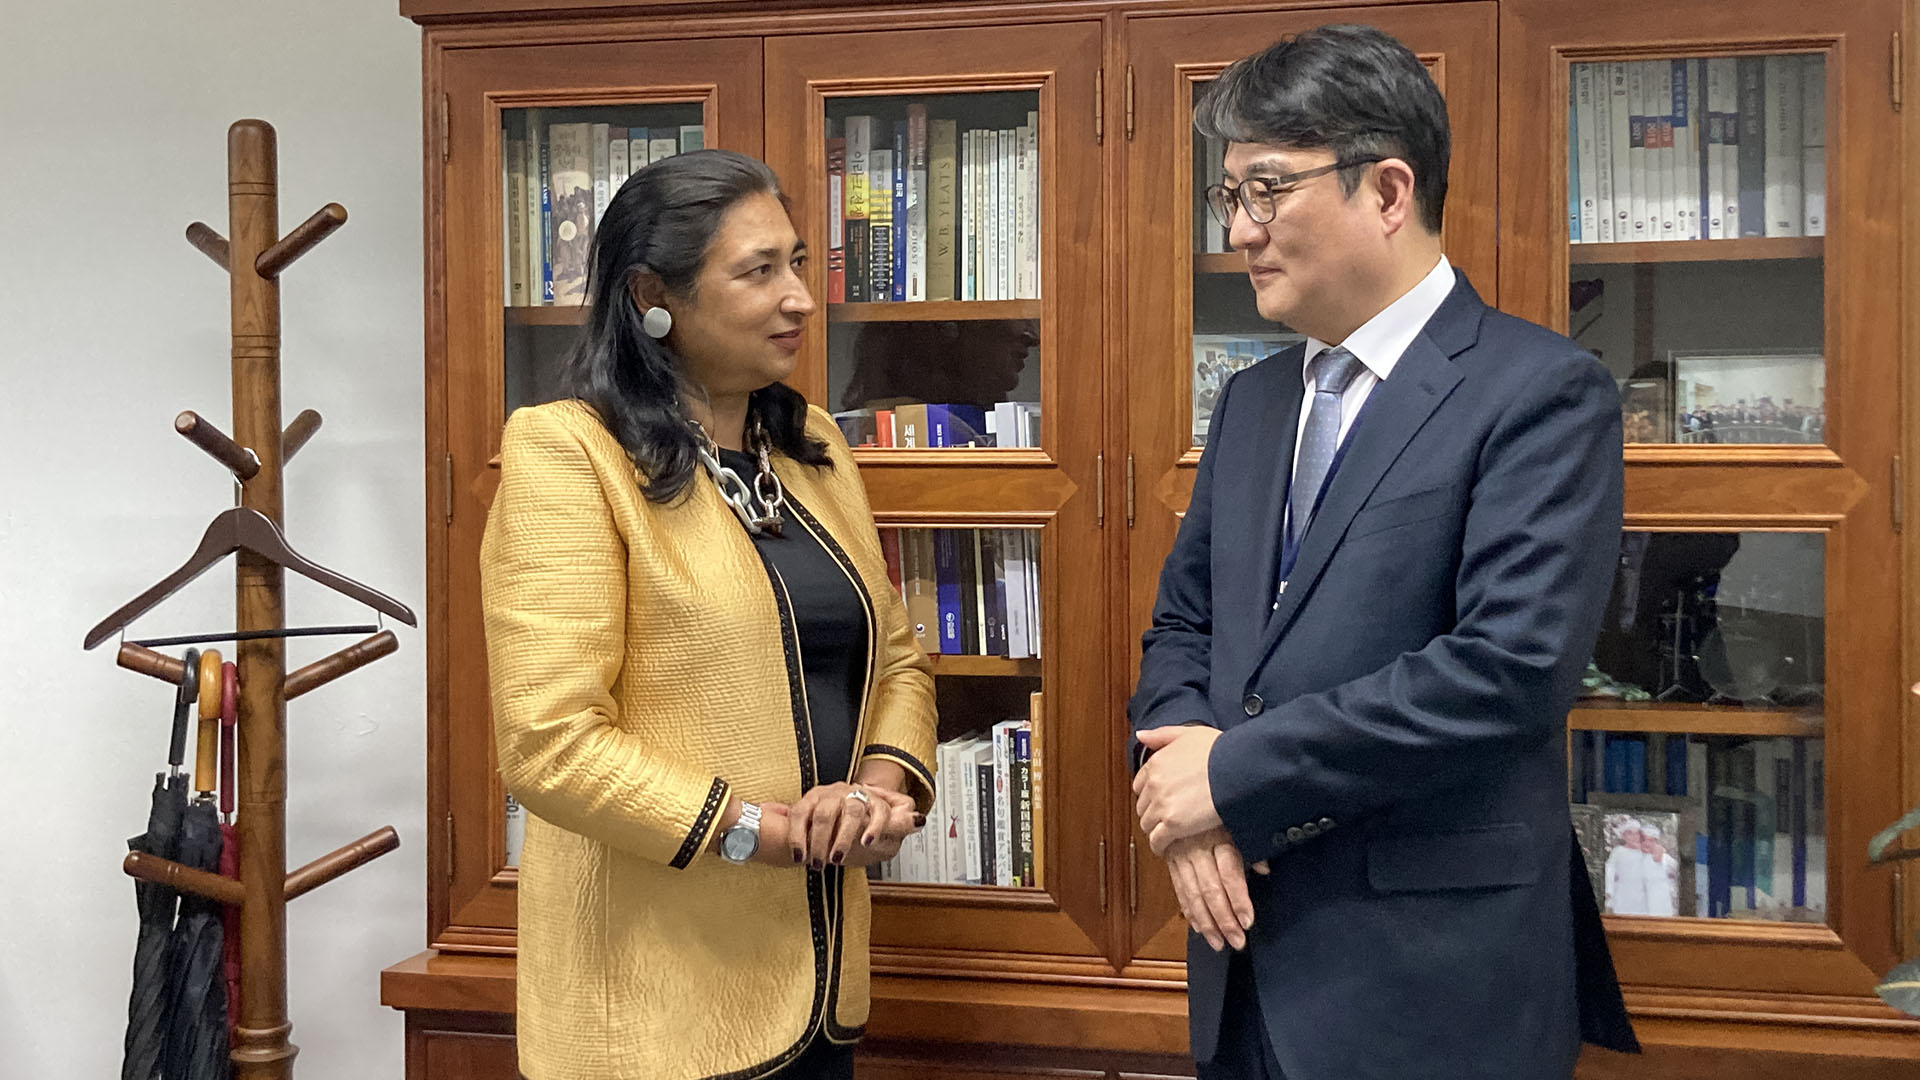 DED Bhatia met with H.E. Mr Yong-min Park, Deputy Minister for Multilateral and Global Affairs at Ministry of Foreign Affairs, Republic of Korea. Photo: UN Women/Yoomi Jun